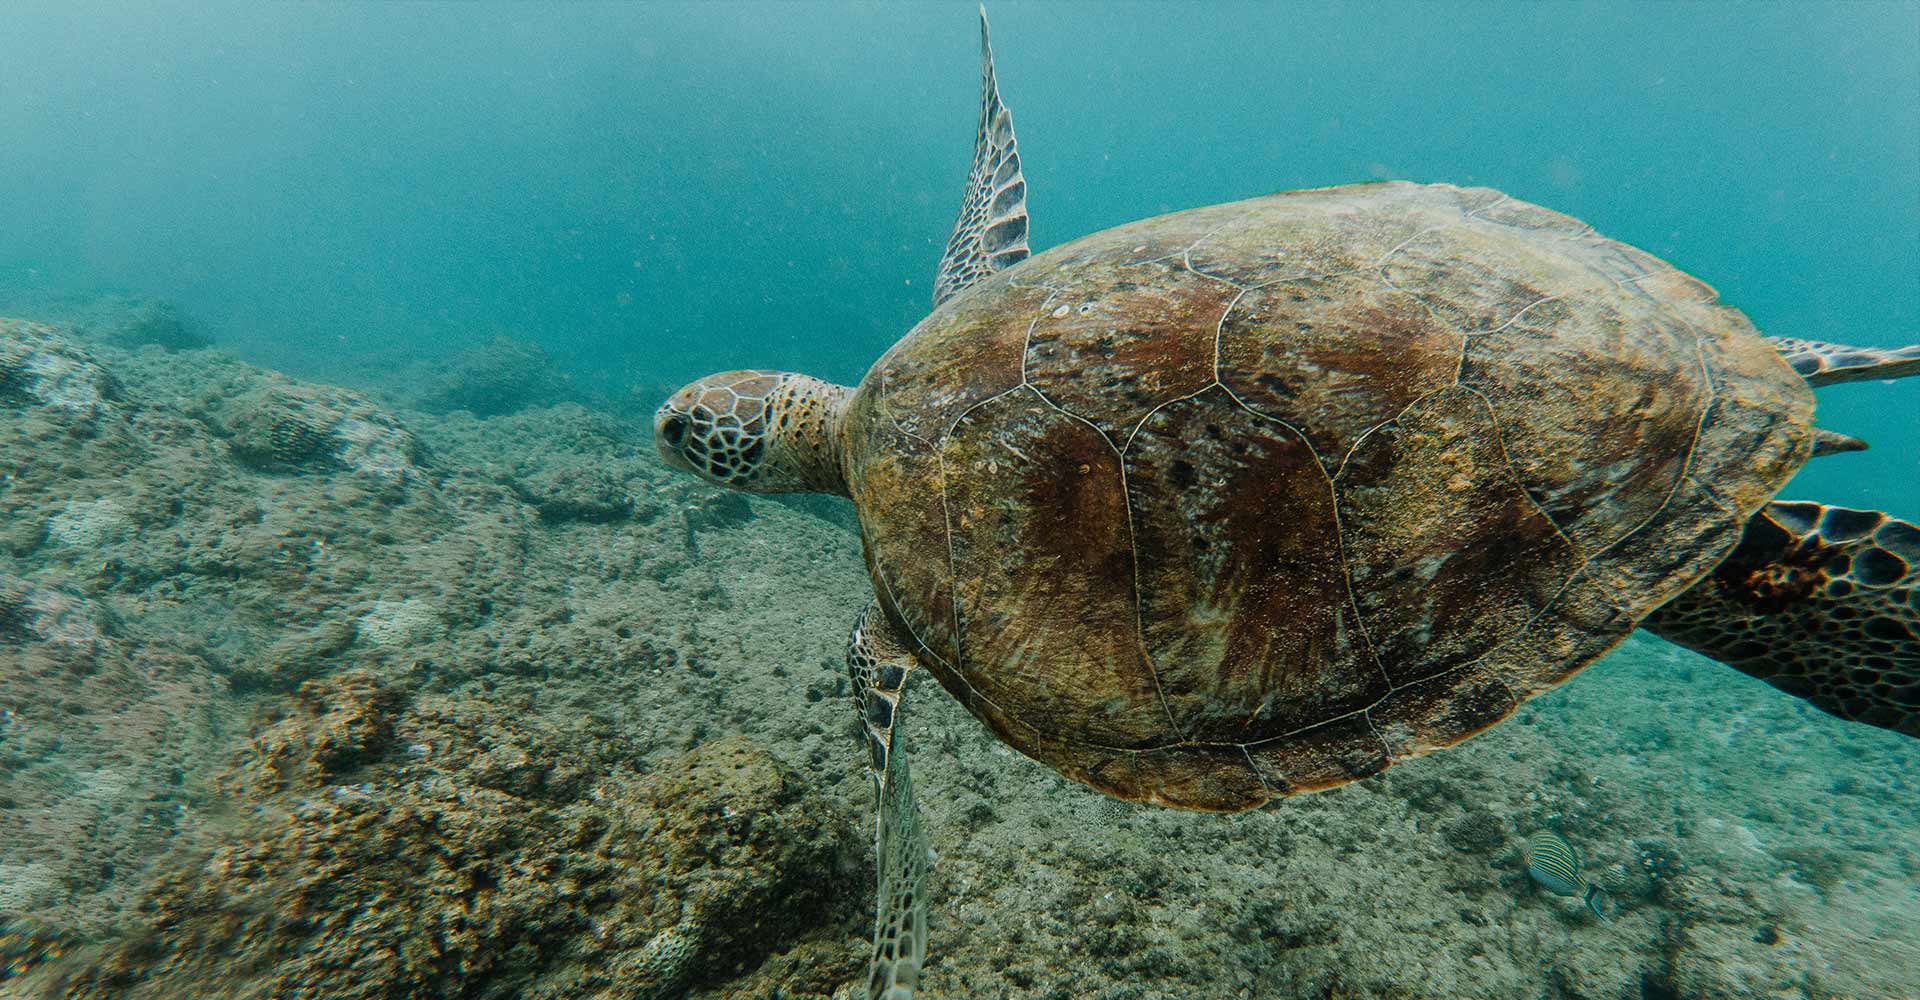 Underwater view of a sea turtle moving through the sea